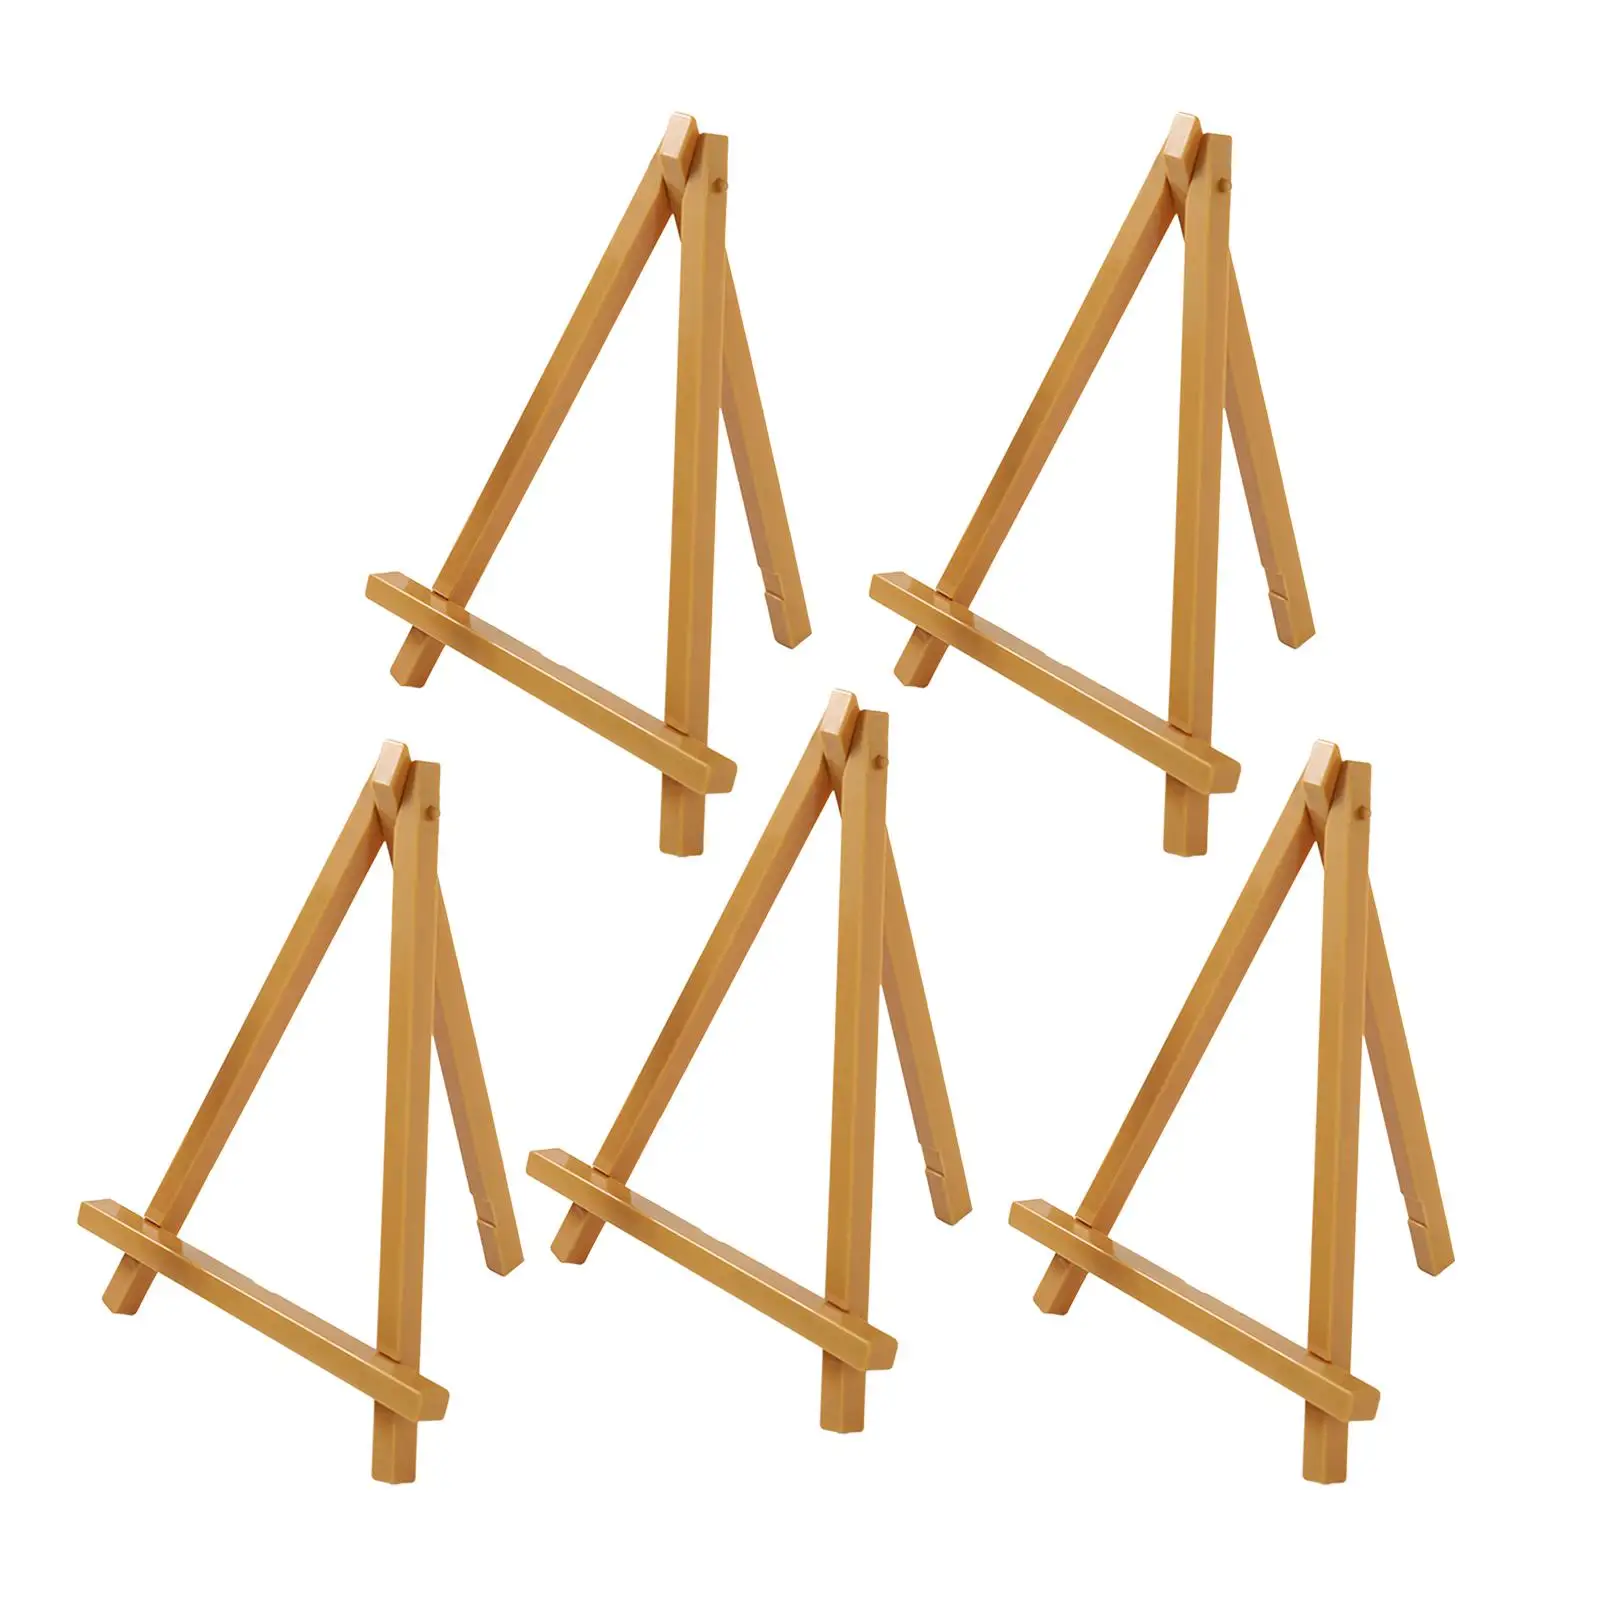 

5 Pieces Wooden Mini Display Easel Portable Painting Easel Adjustable Height Art Drawing Easels Artist Number Card Stand Folding